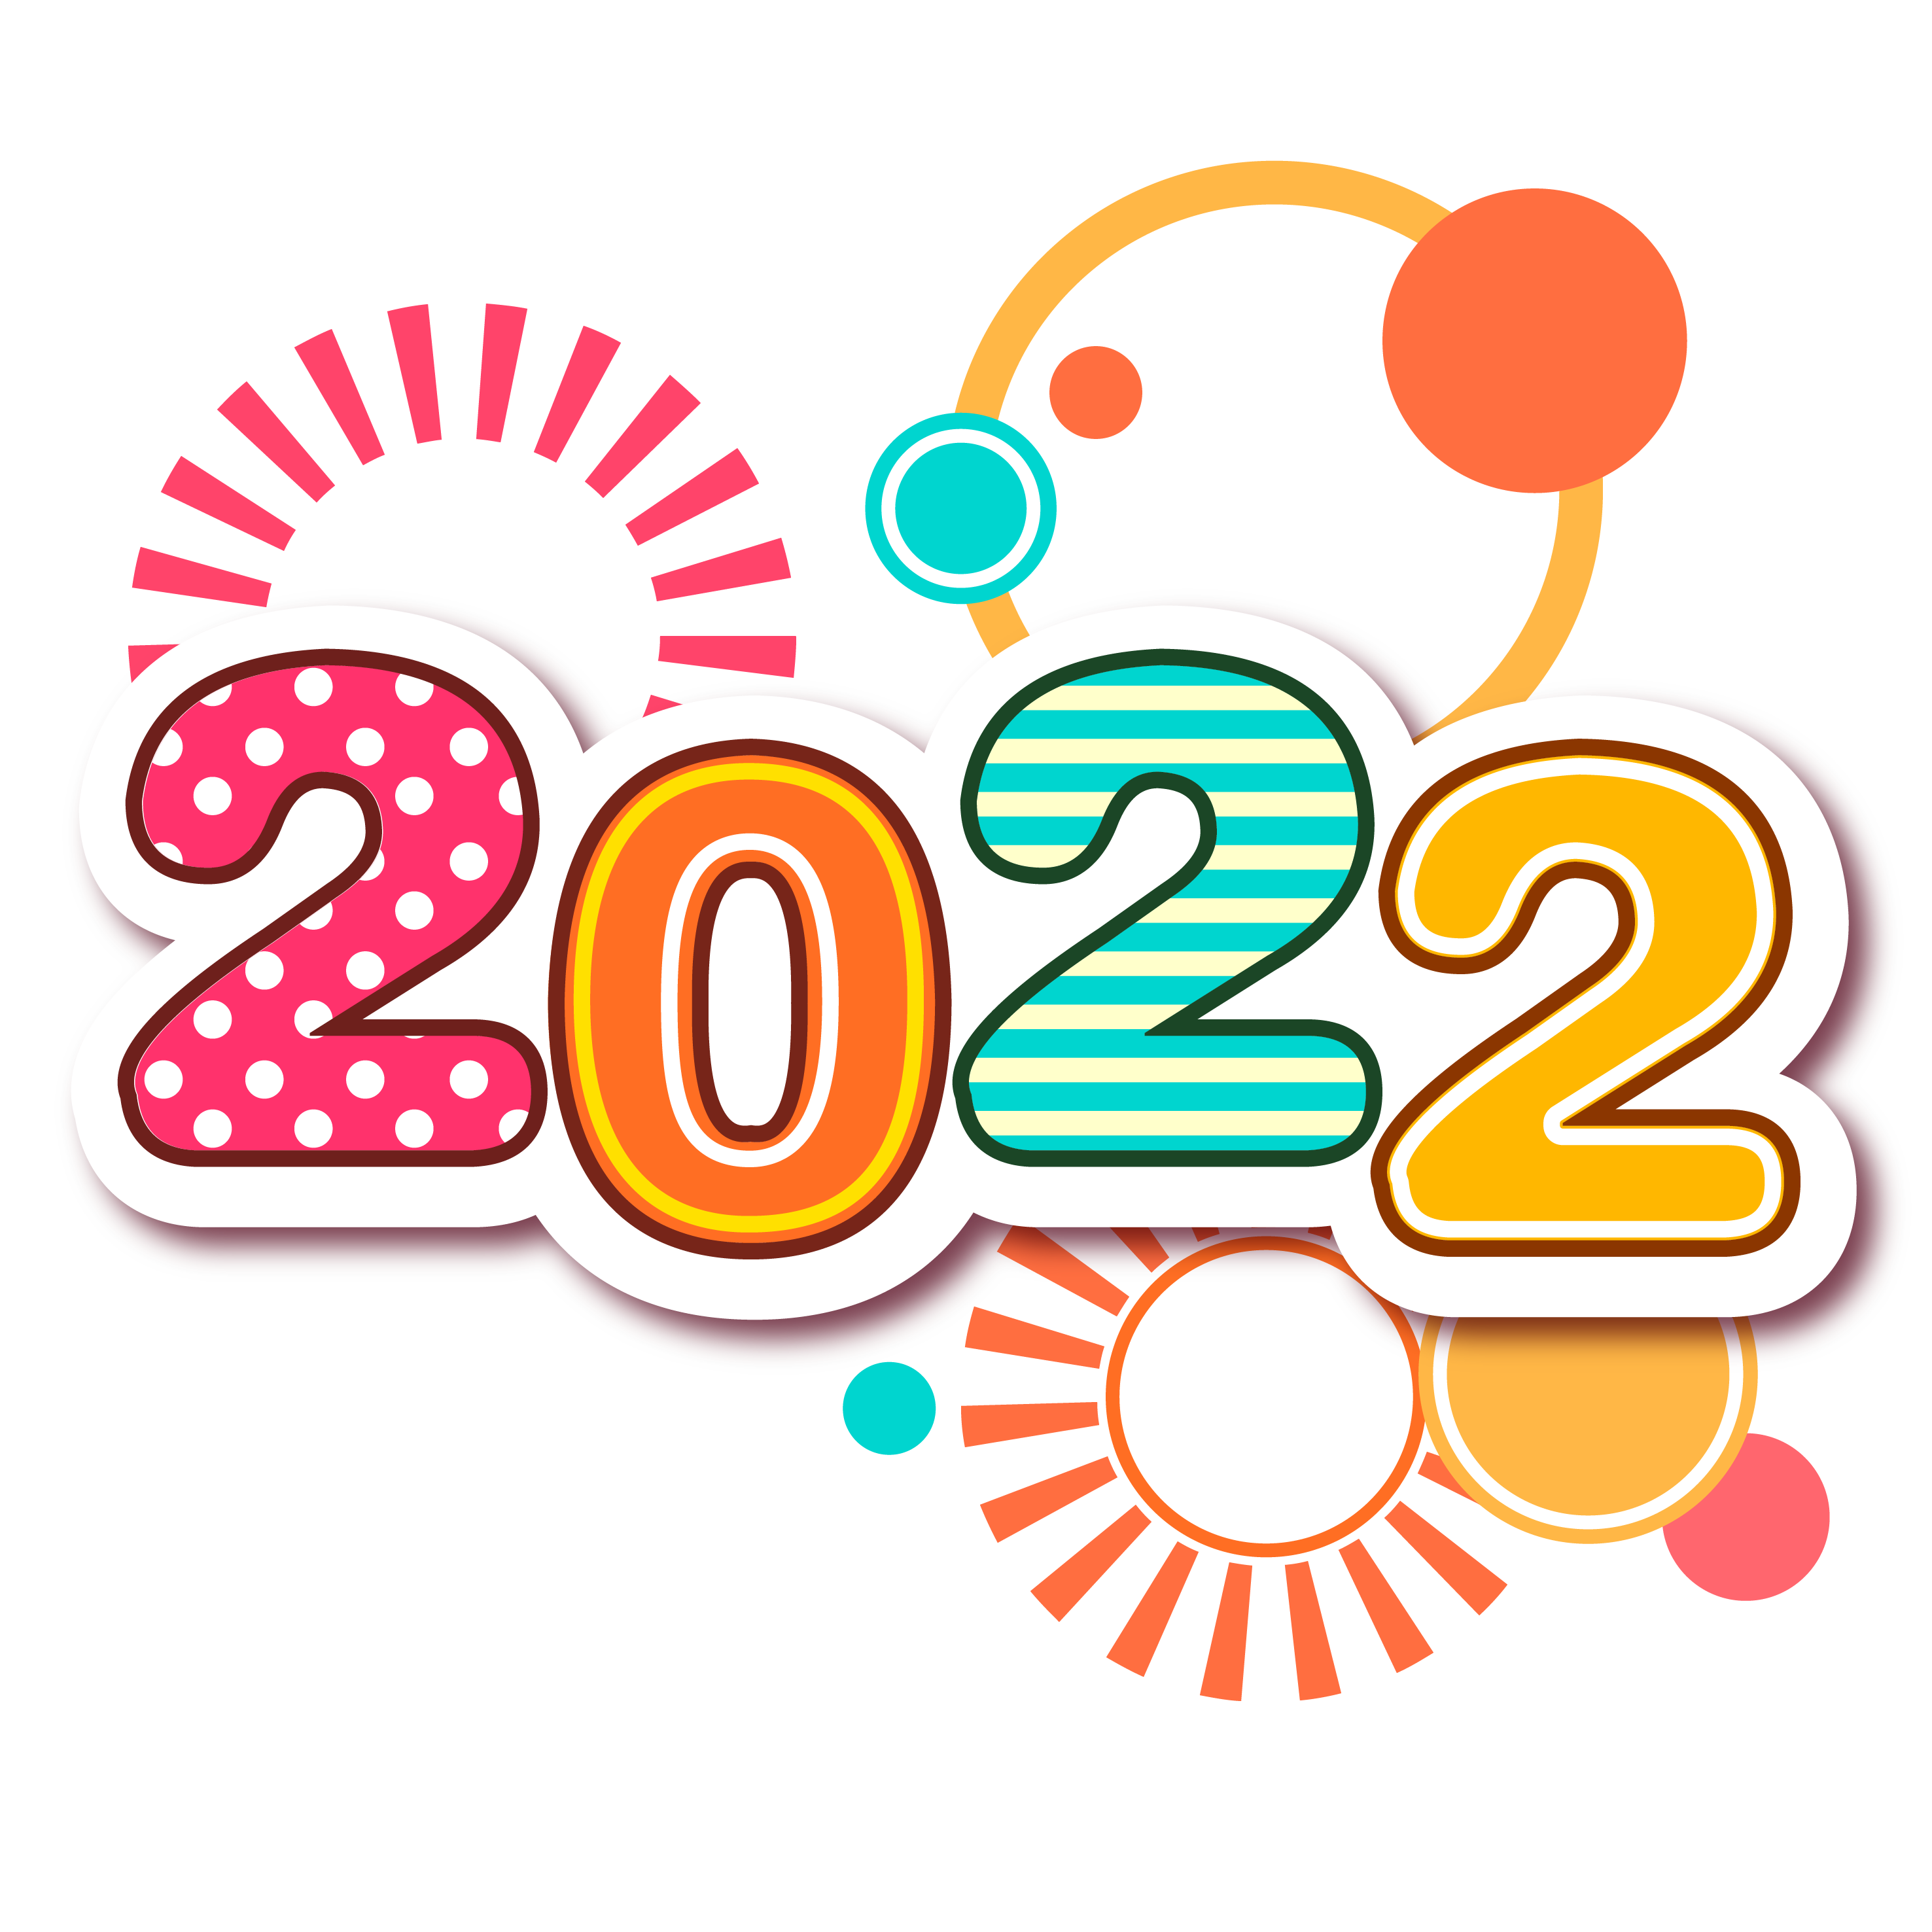 Pngtree—2022-happy-new-year-colourful_6331063.png